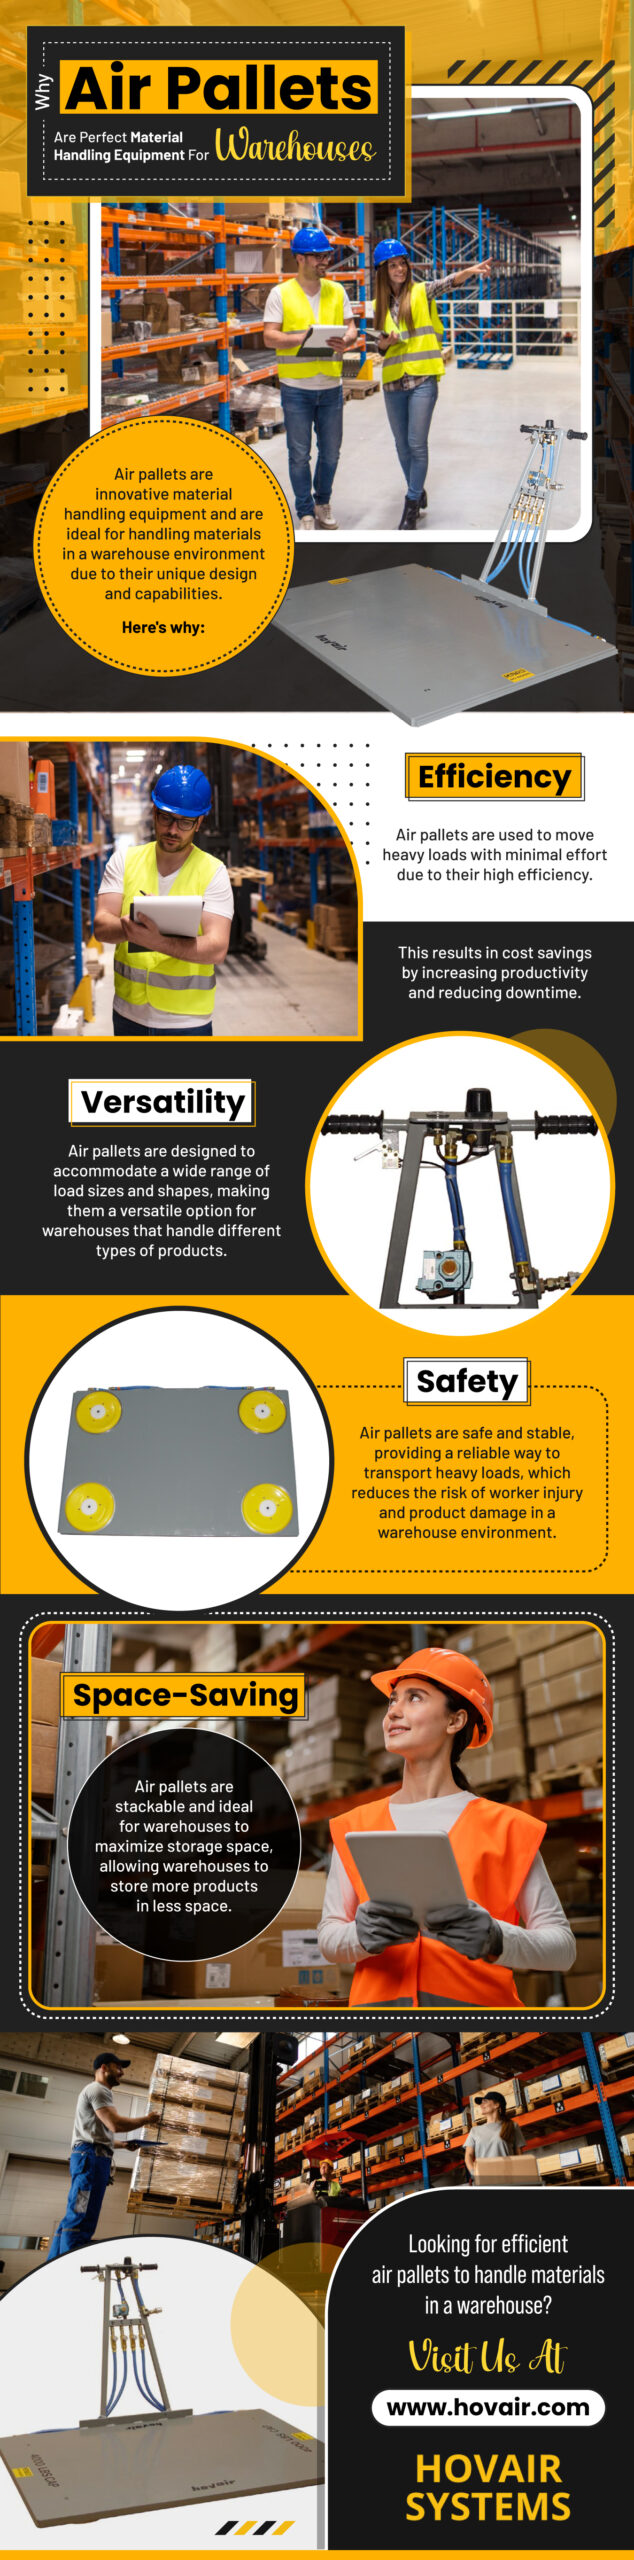 Why Air Pallets Are Perfect Material Handling Equipment For Warehouses